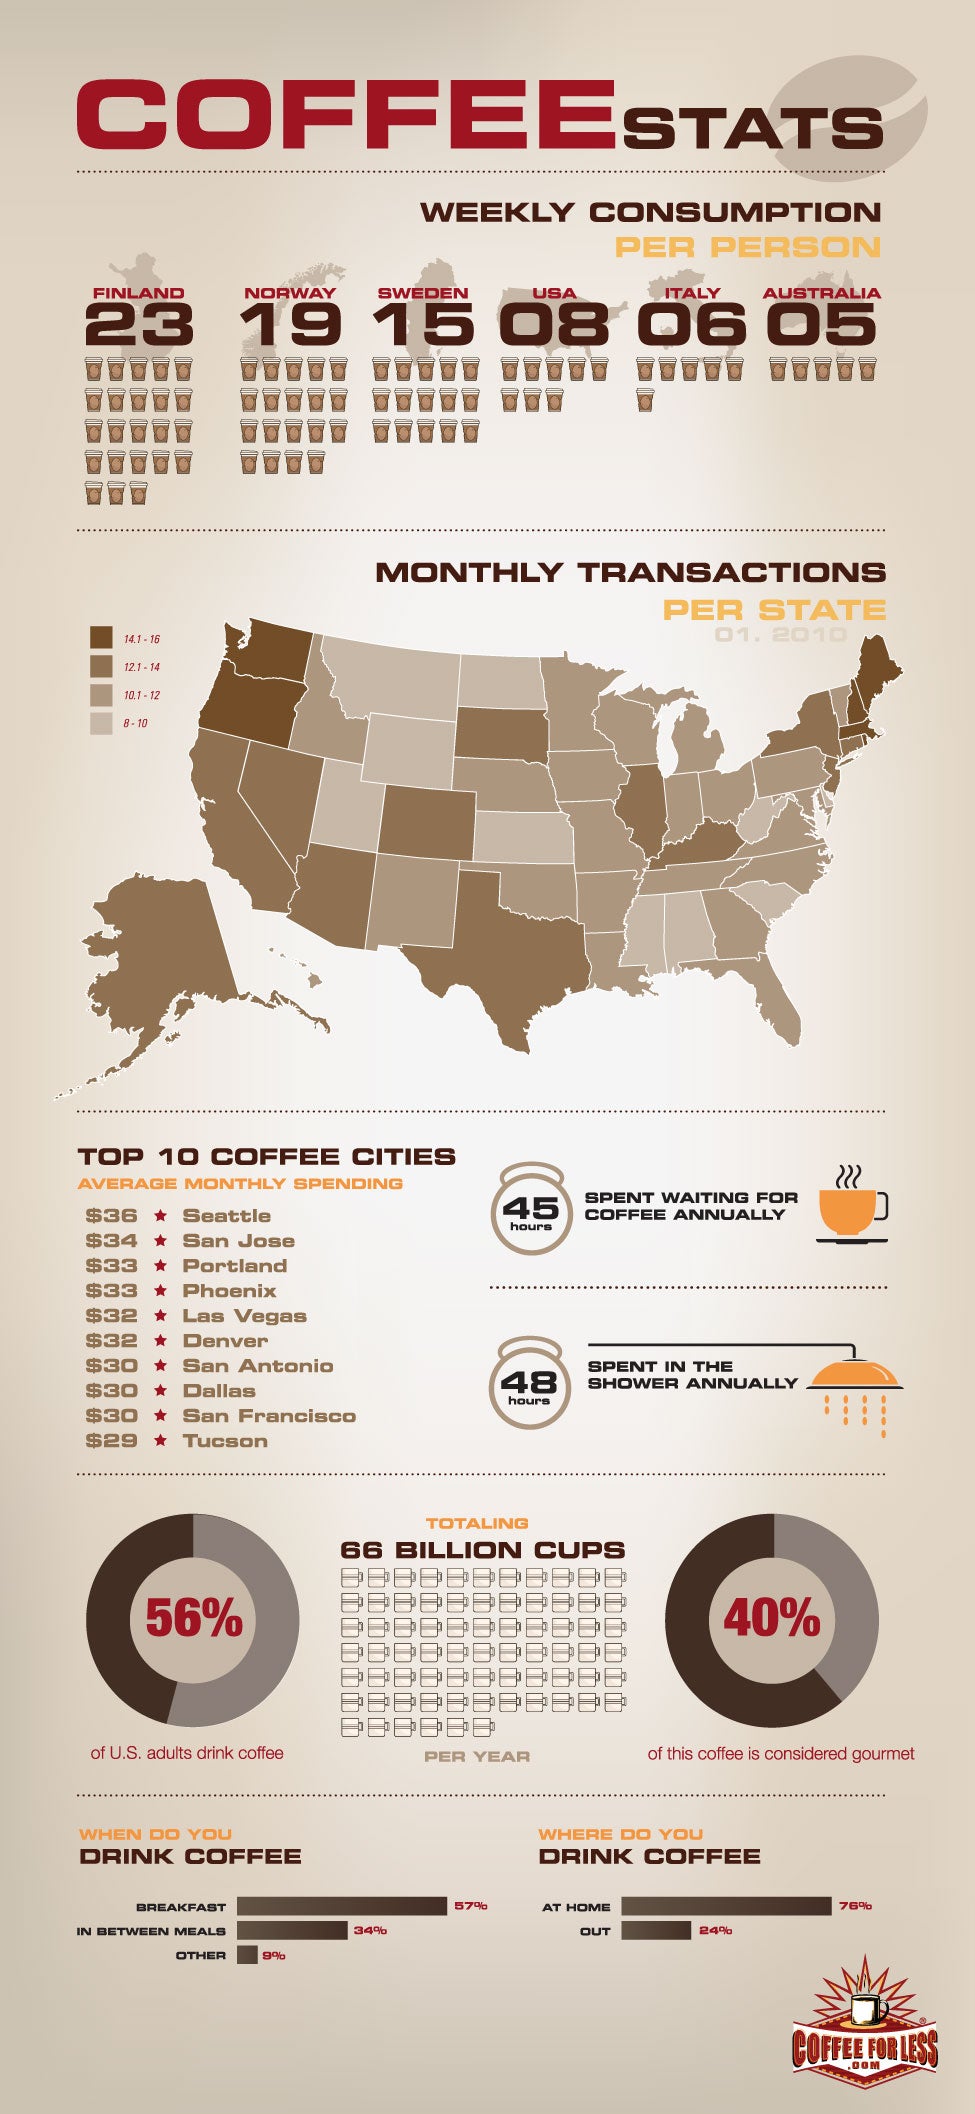 Find out who drinks the most coffee globally and throughout the United States.